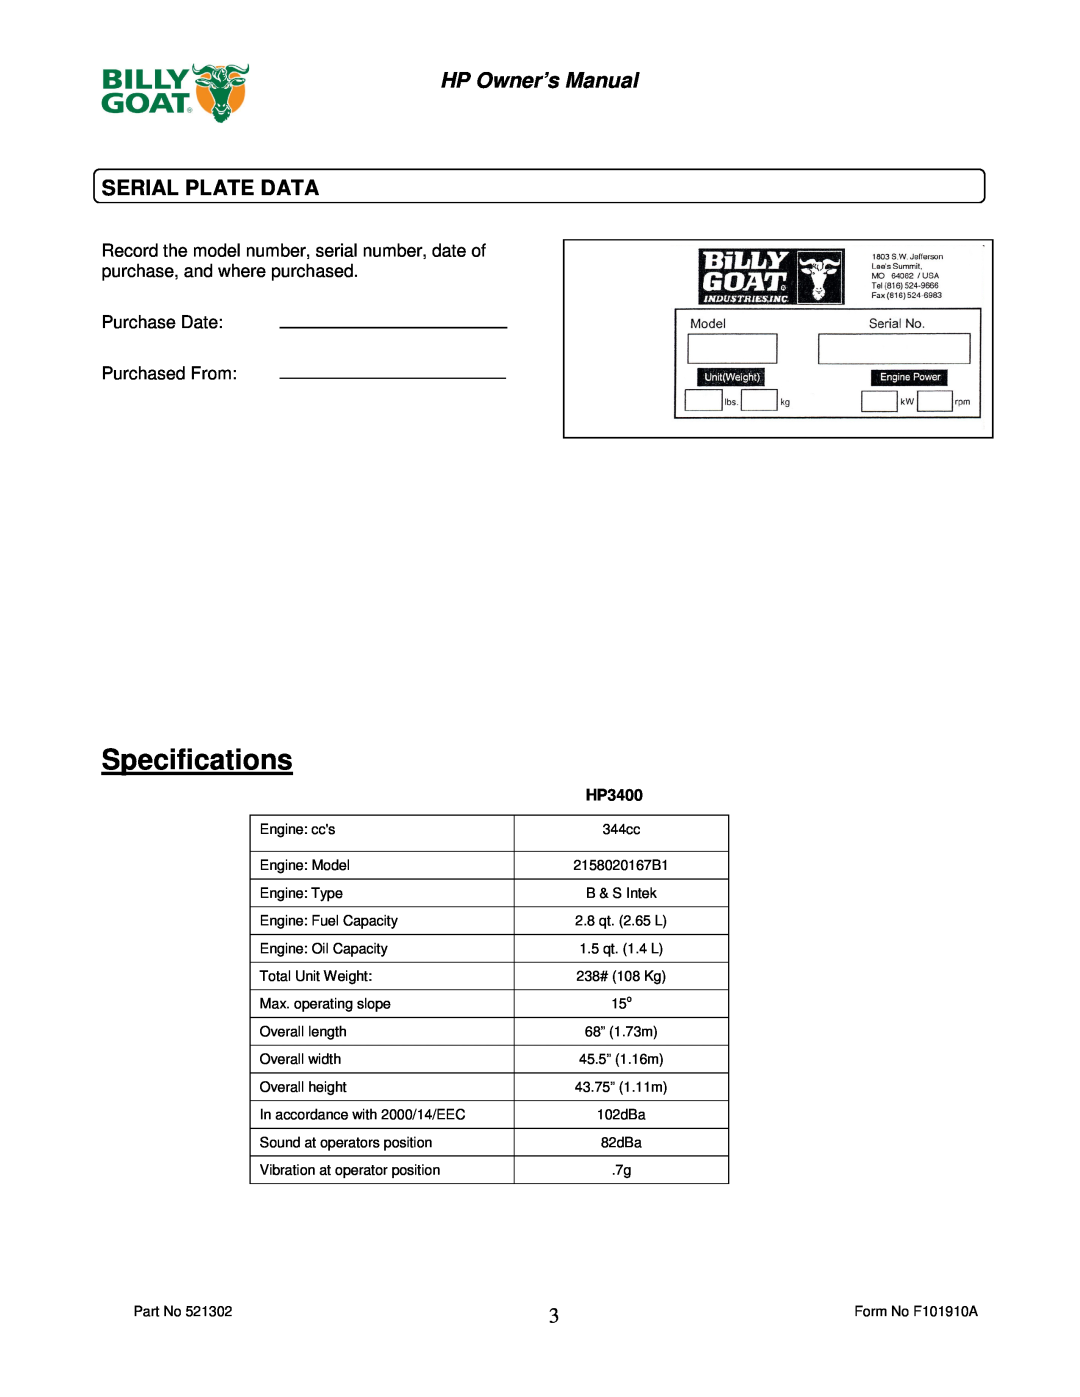 Billy Goat HP3400 owner manual Serial Plate Data, Specifications, HP Owner’s Manual 